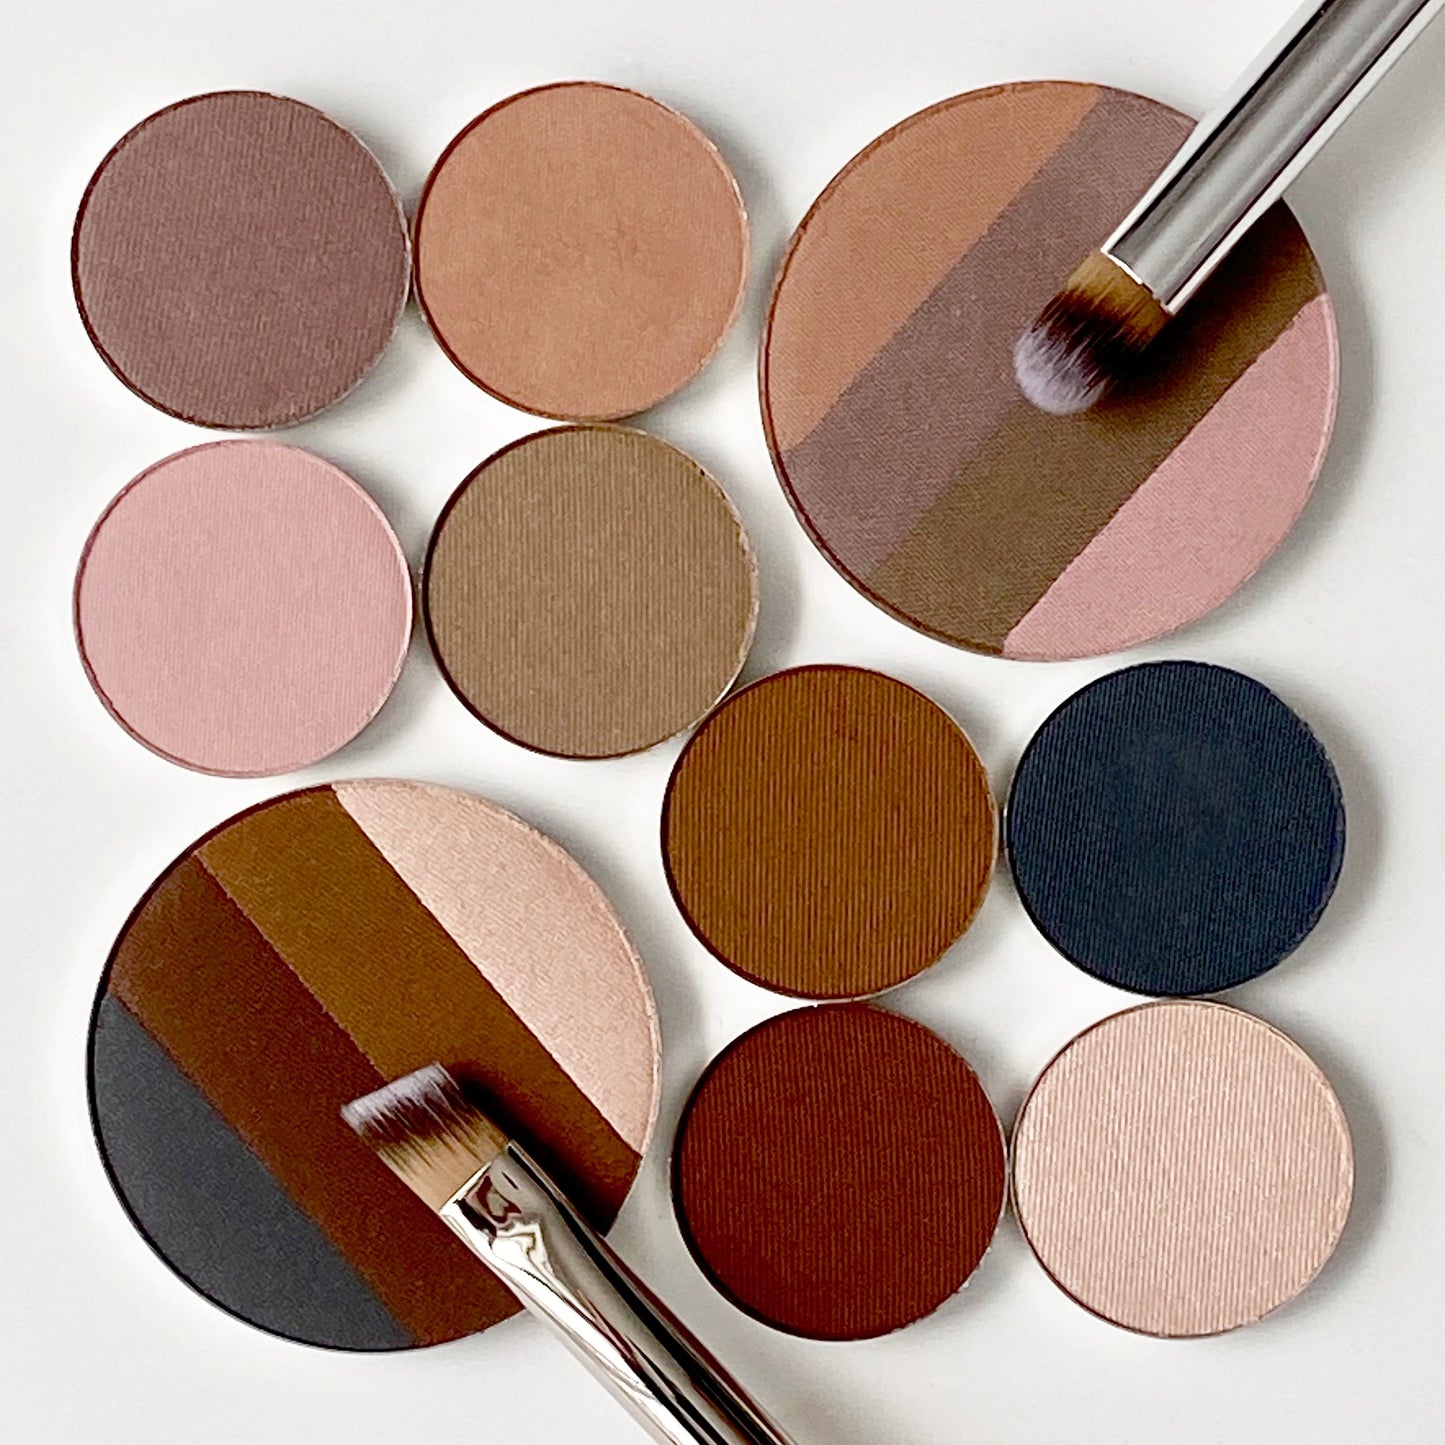 Eye shadow palette refills arranged with the large quadrant eye shadow next to the four smaller refills of each shade. 